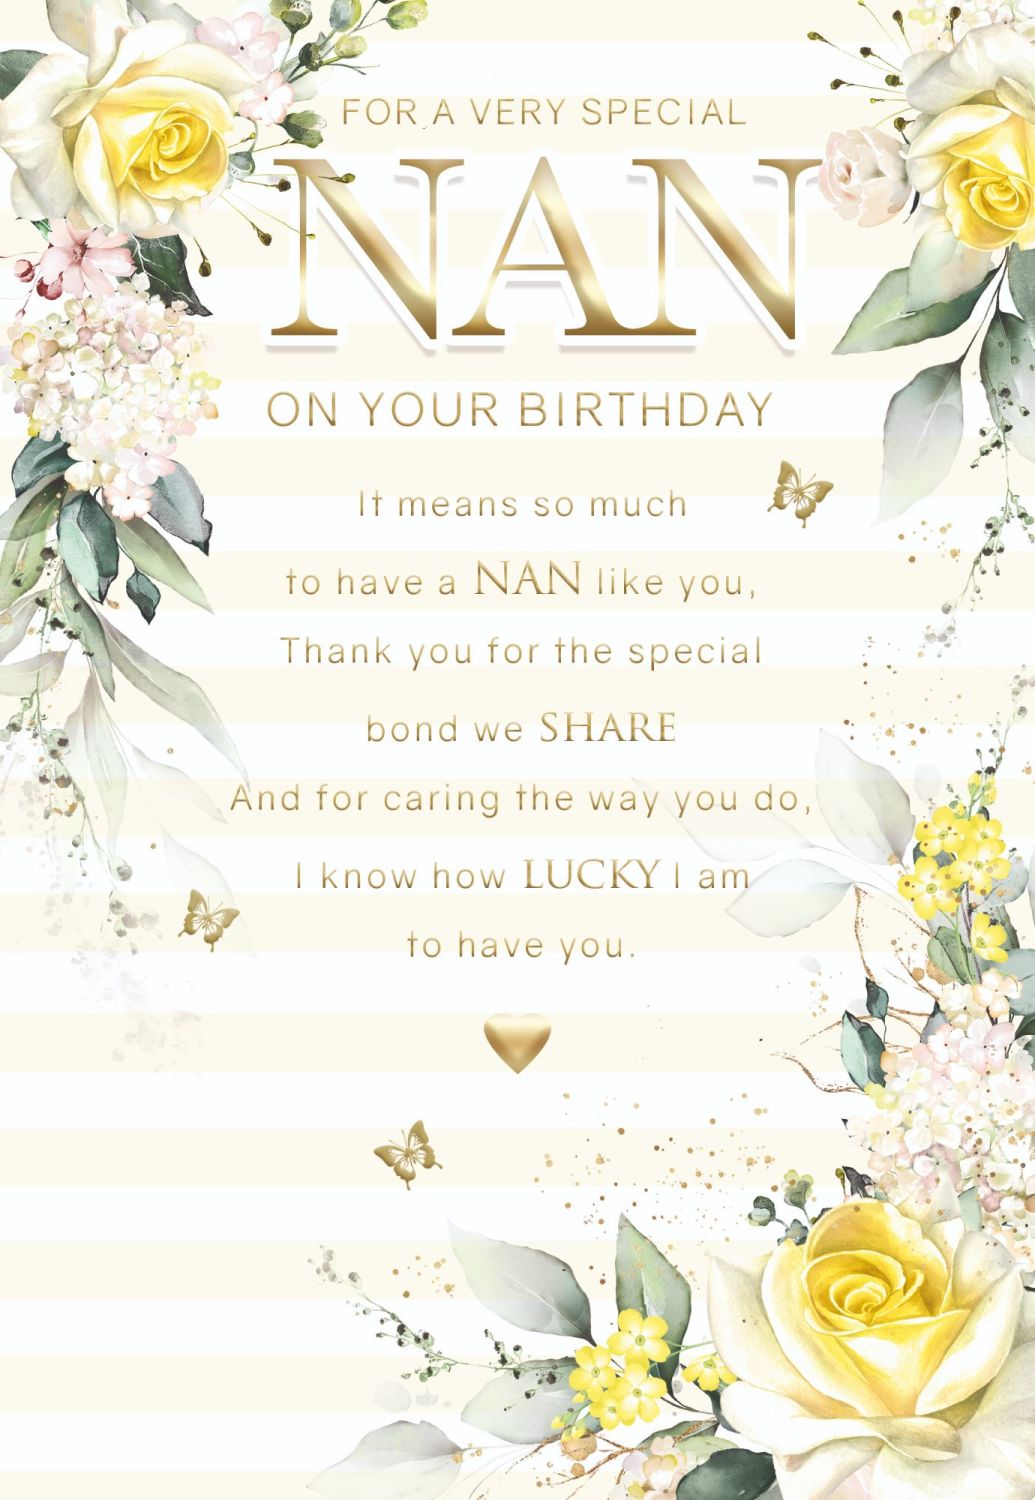 Special Nan Birthday Cards - THANK You For The SPECIAL BOND We SHARE - Birt